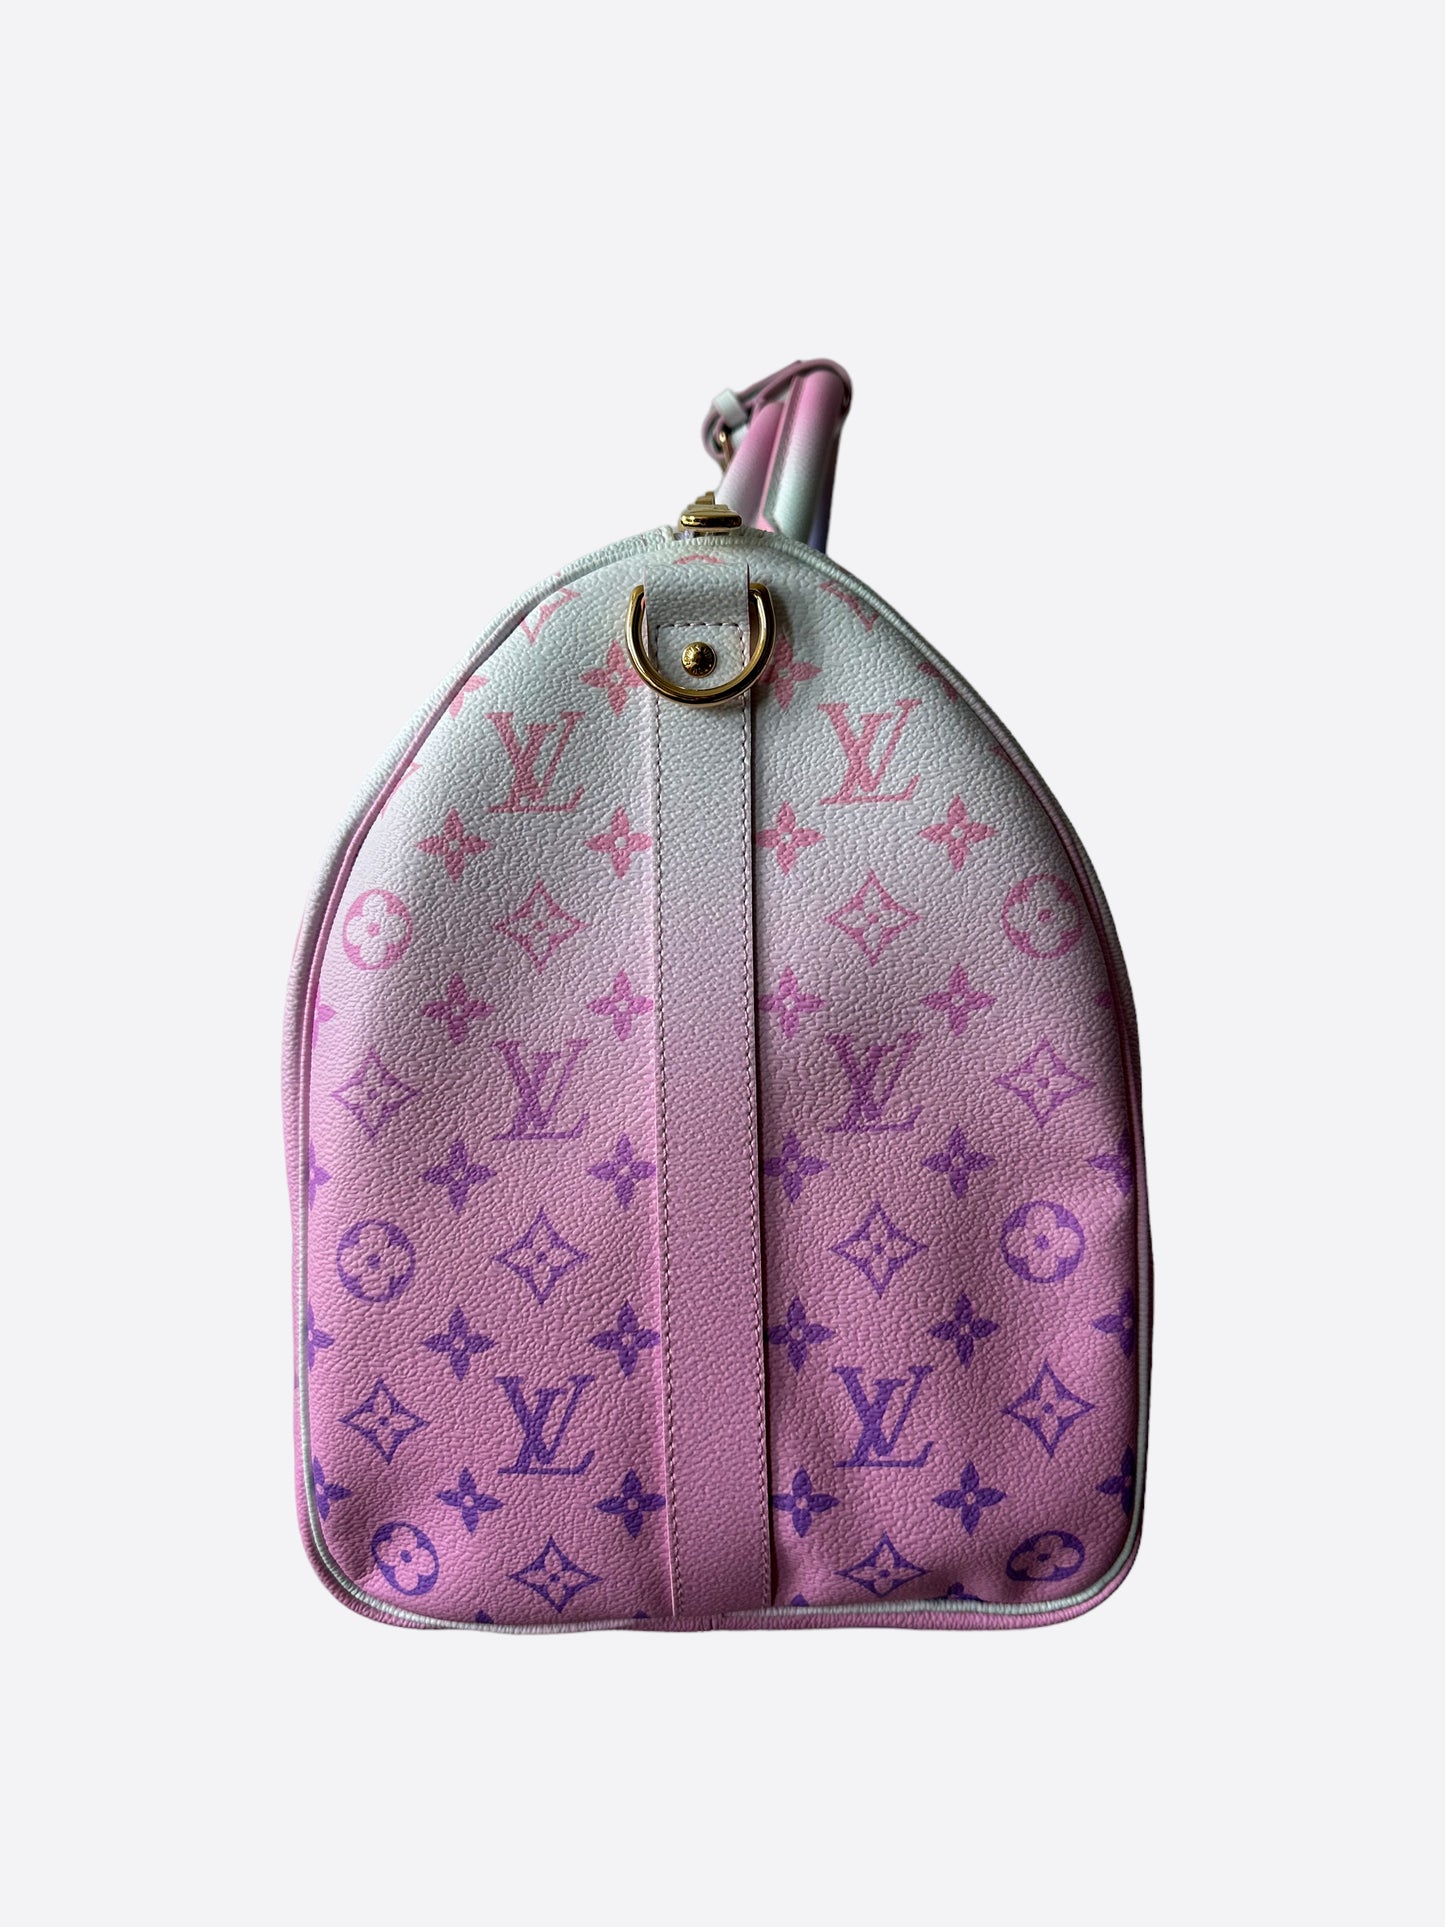 Louis Vuitton Keepall 45, Sunrise Monogram in Pastel Color, New in